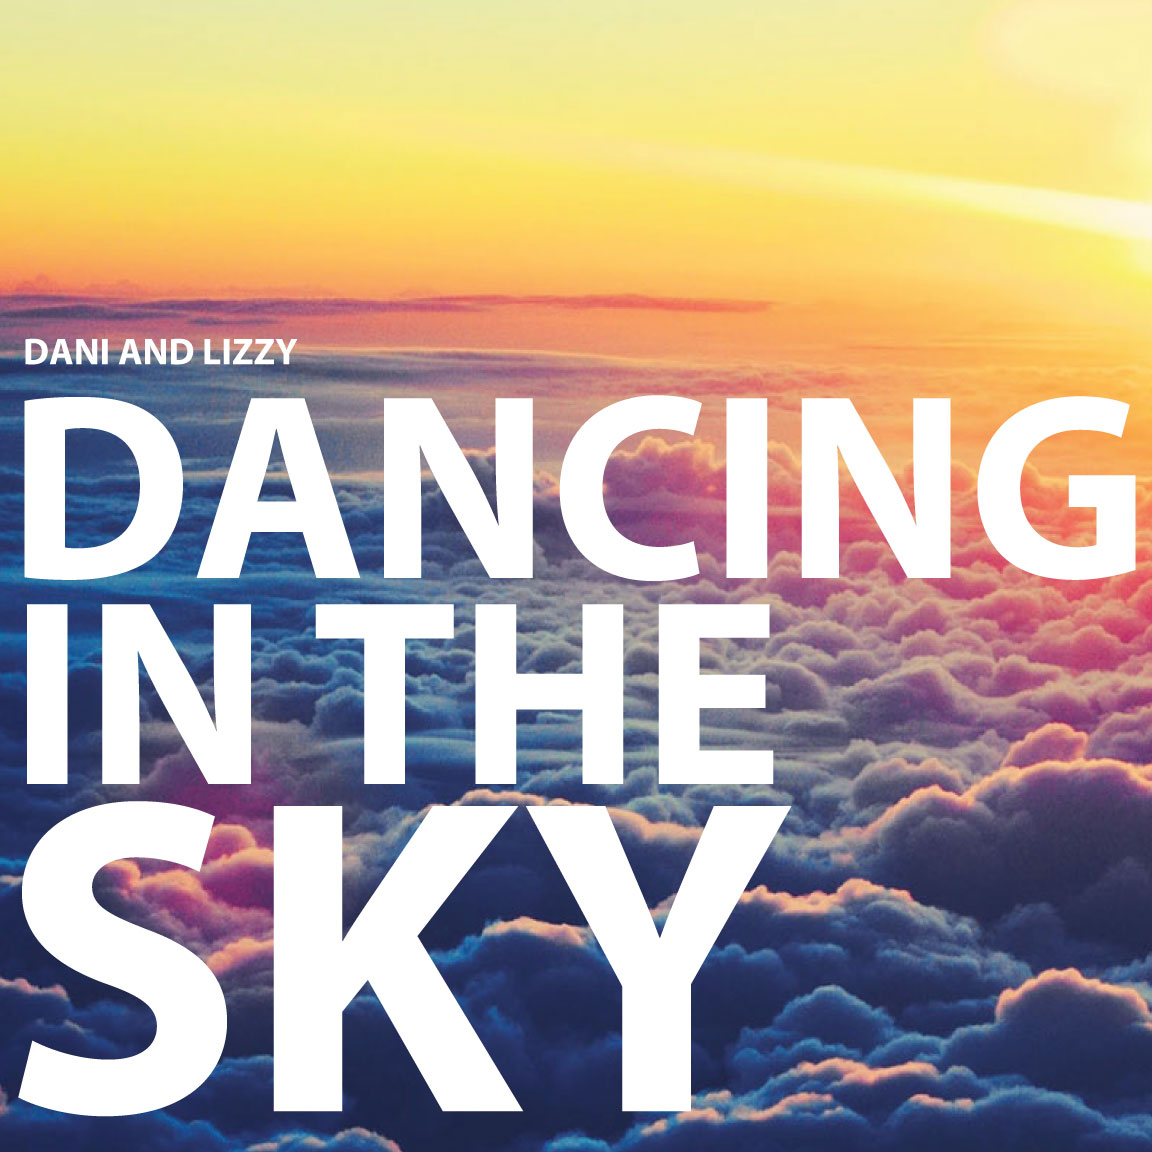 dani and lizzy dancing in the sky free download